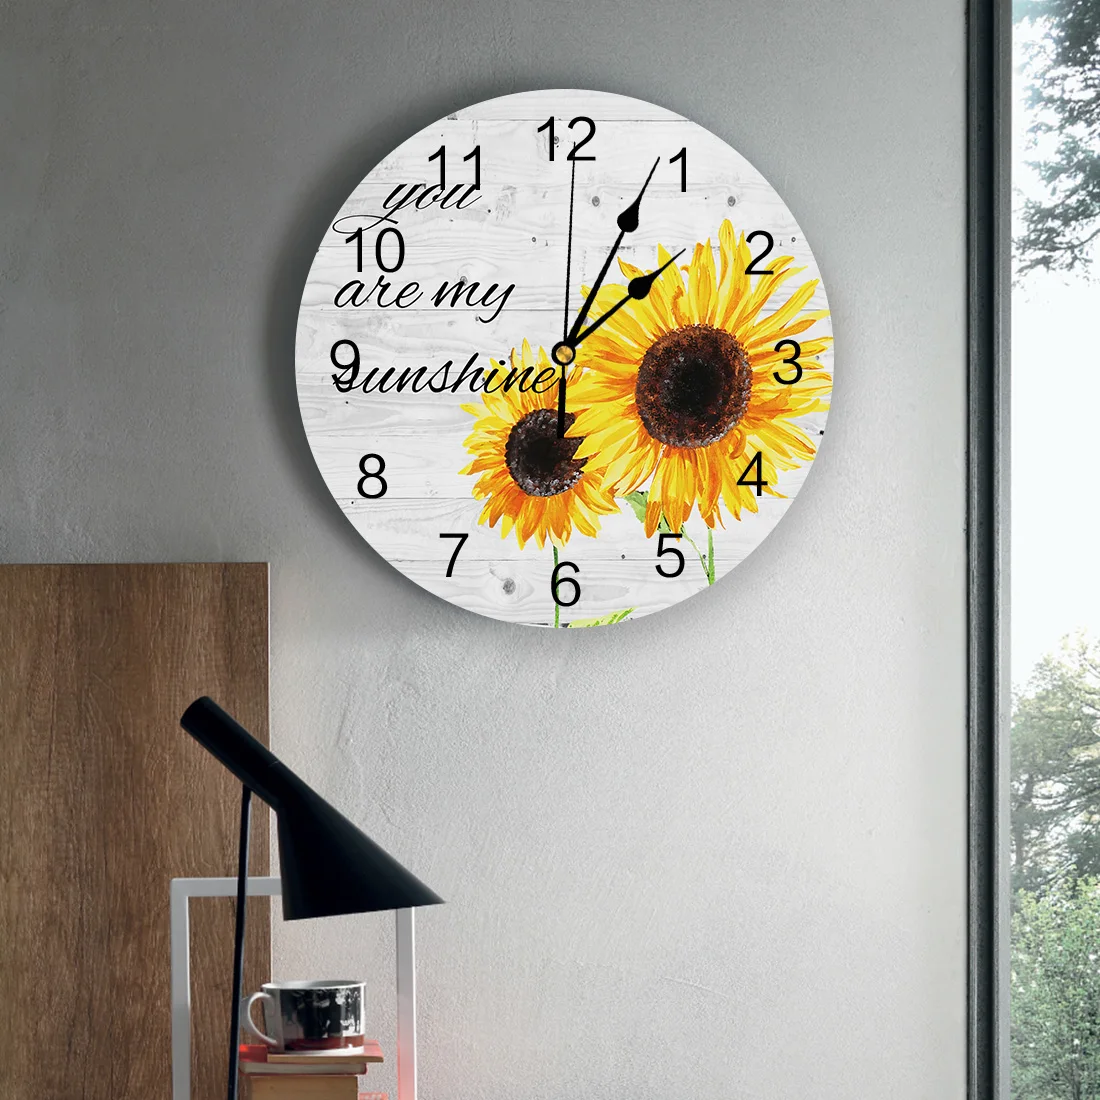 Sunflower You Are My Sunshine Printed PVC Wall Clock Modern Design Home Decor Bedroom Silent O'clock Watch Wall For Living Room